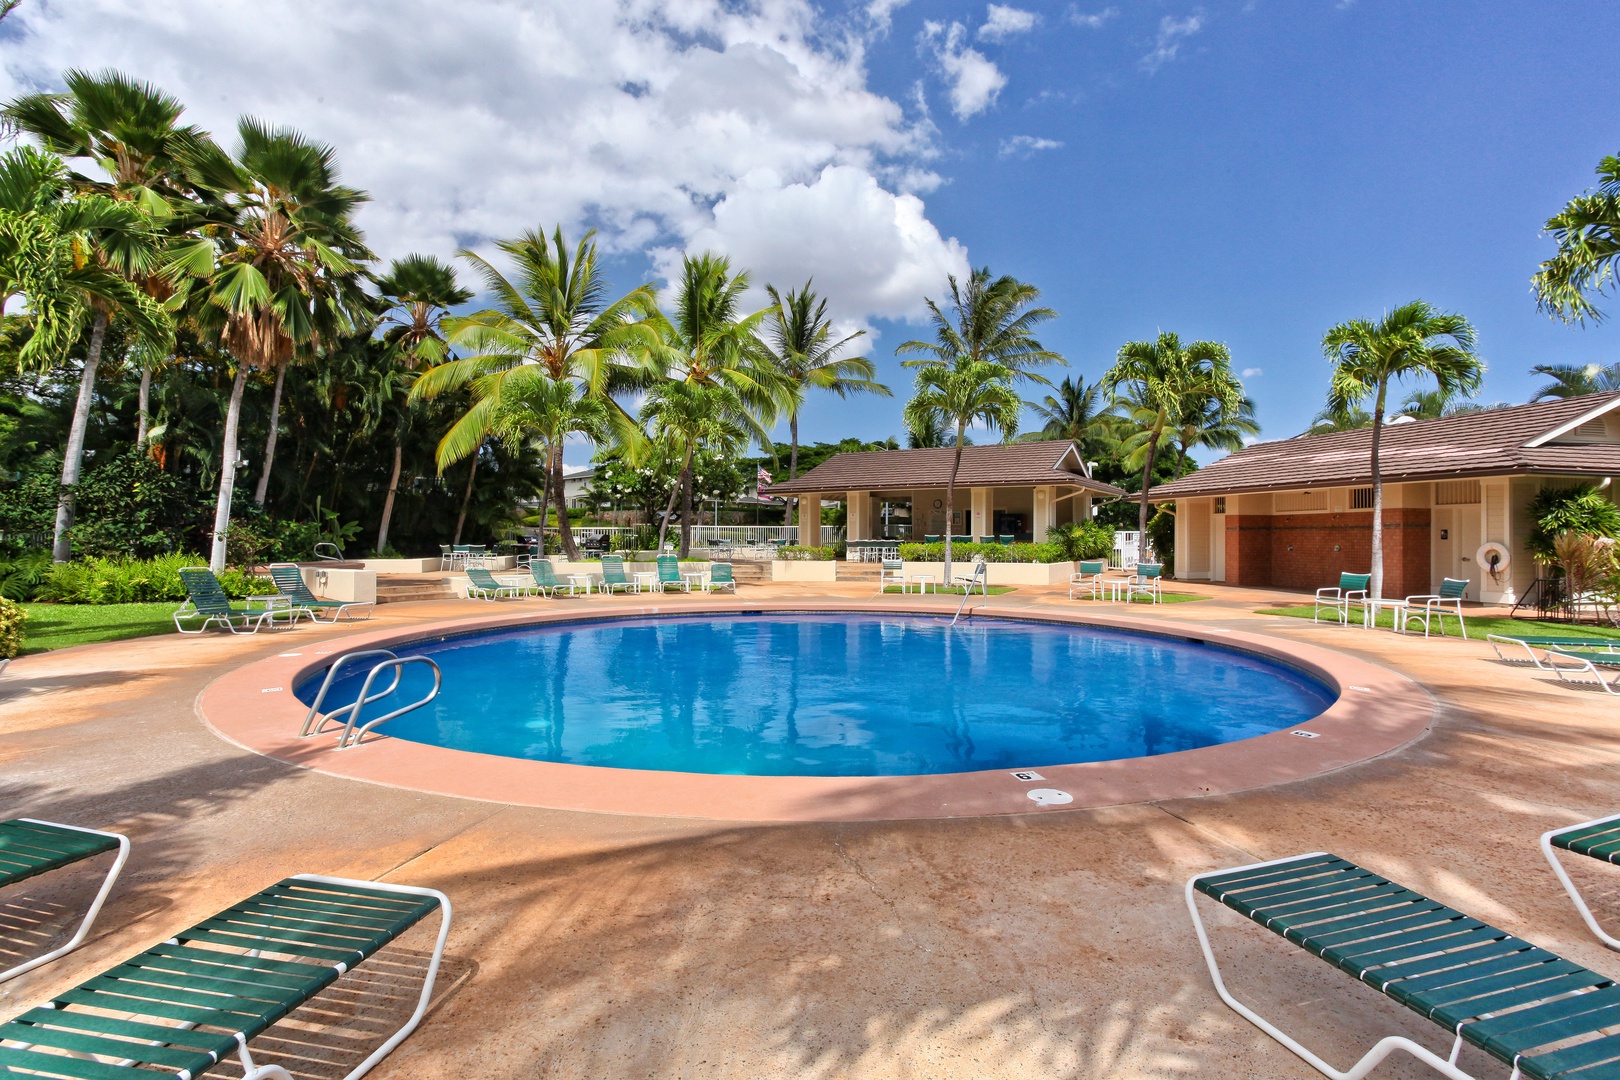 Kapolei Vacation Rentals, Fairways at Ko Olina 8G - Go for a swim in the sparkling waters and rest in the lounge chairs.